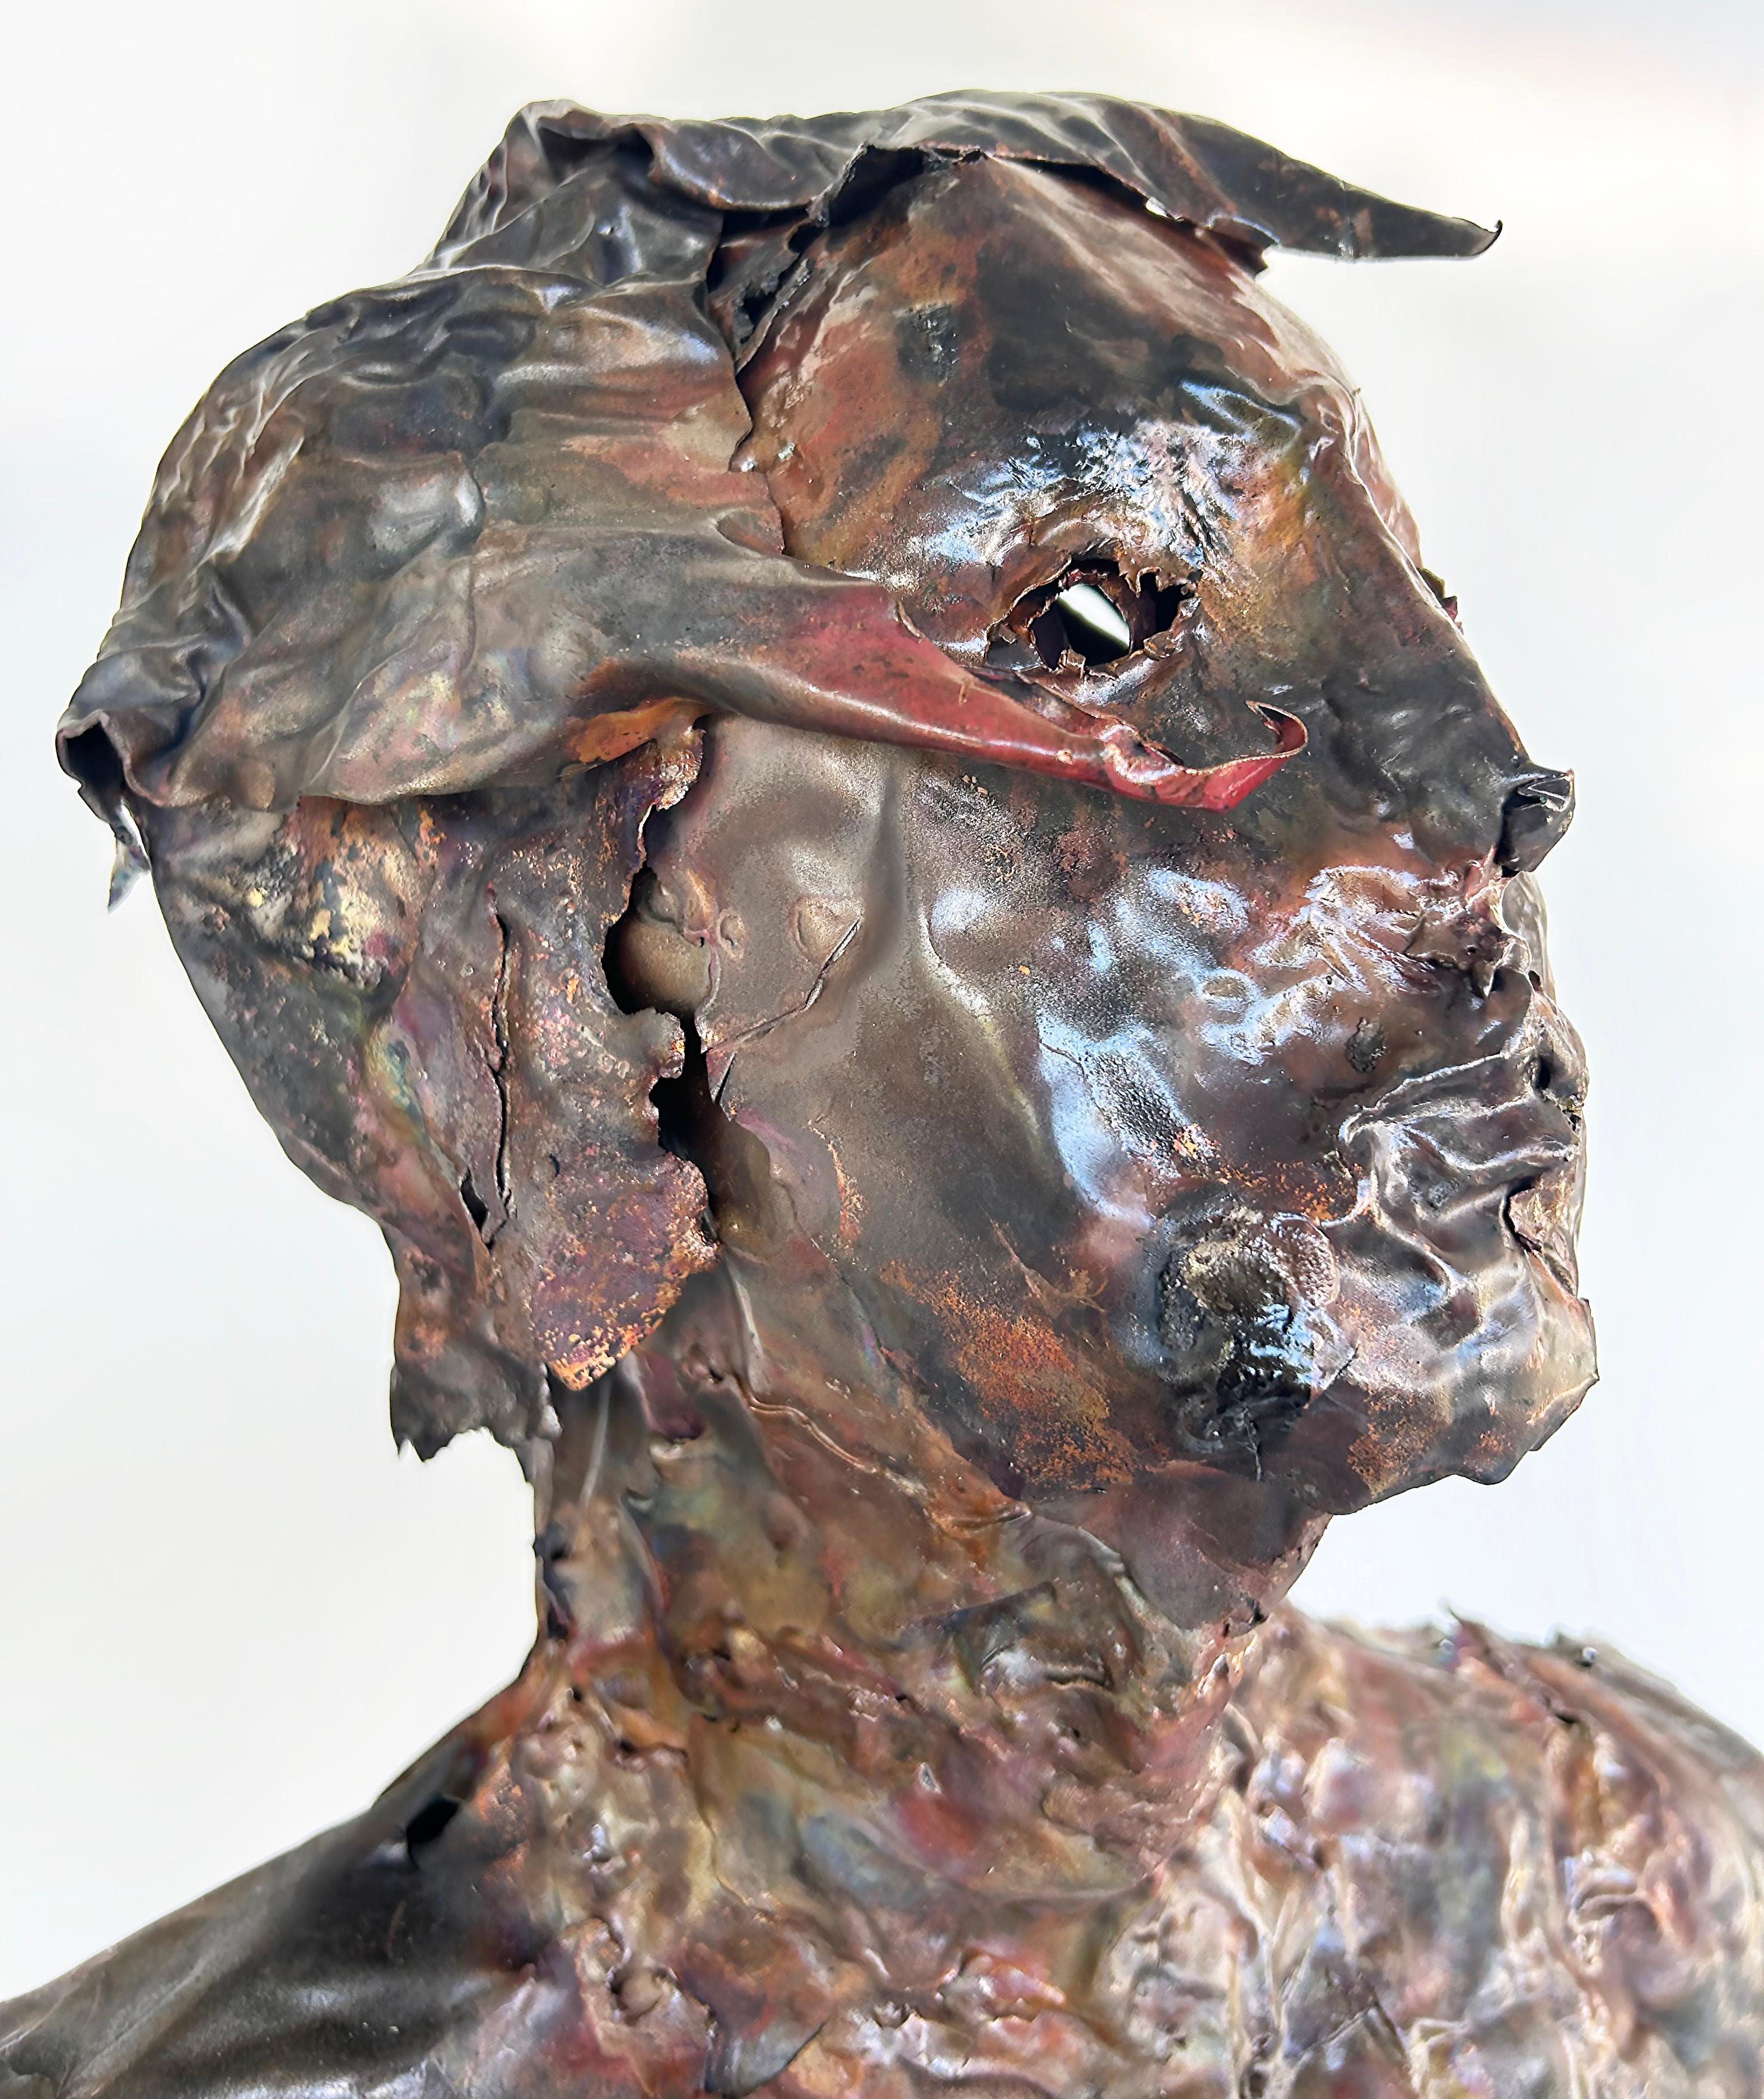 Life-Size Figurative Copper Statue Sculpture by Davis Murphy

Offered for sale is a striking life-size figurative copper sculpture of a male figure by Davis Murphy. This hand-made sculpture is presented on a rustic wood board and his female